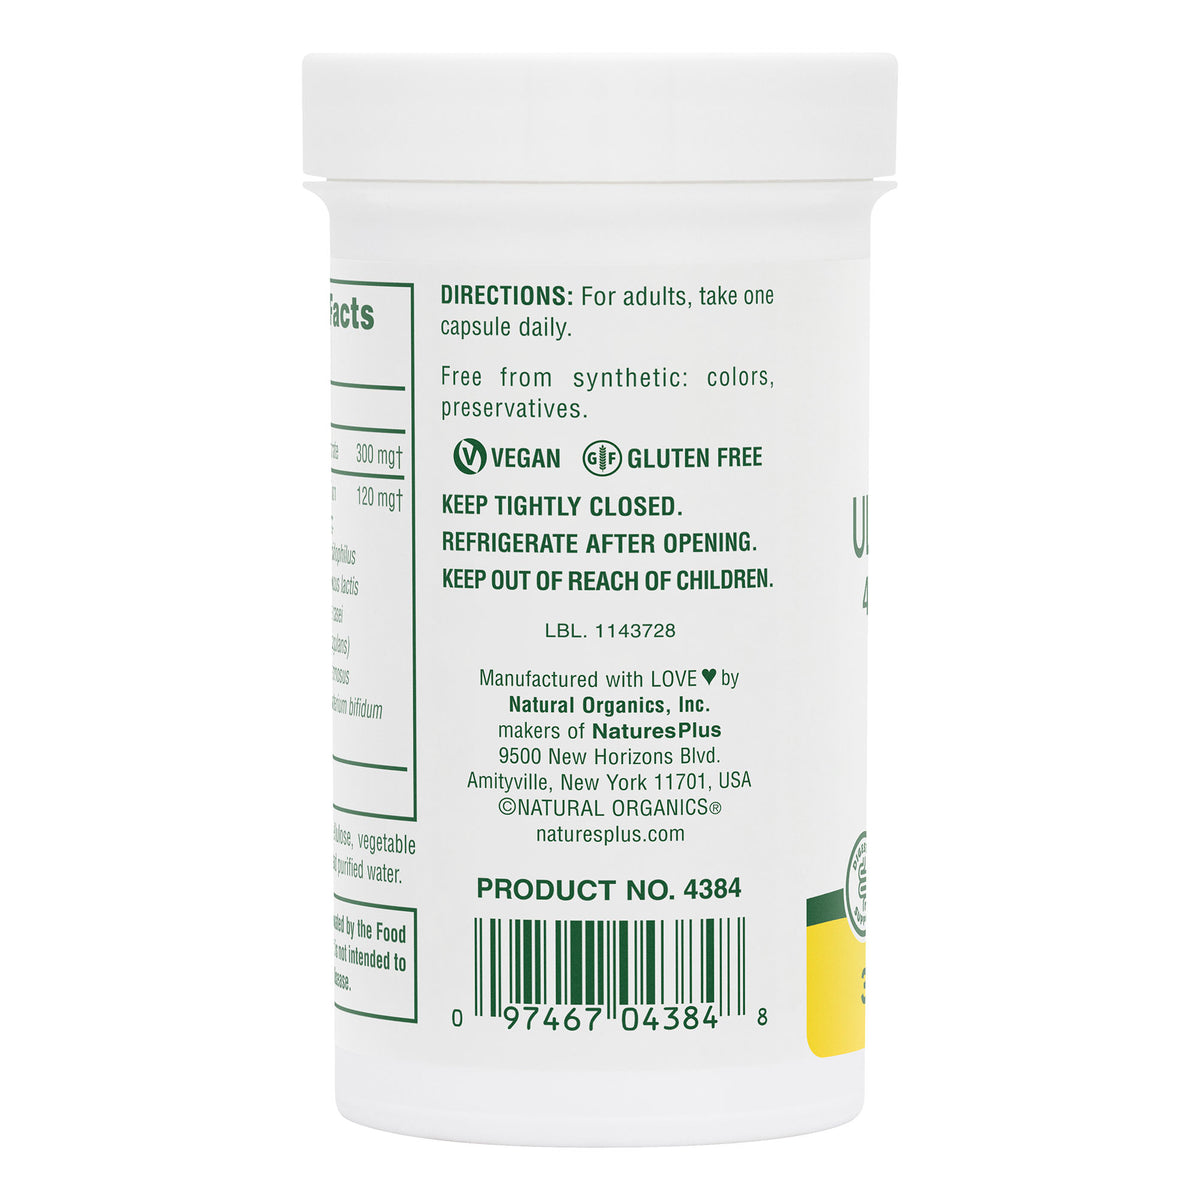 product image of Ultra Probiotics Capsules containing 30 Count